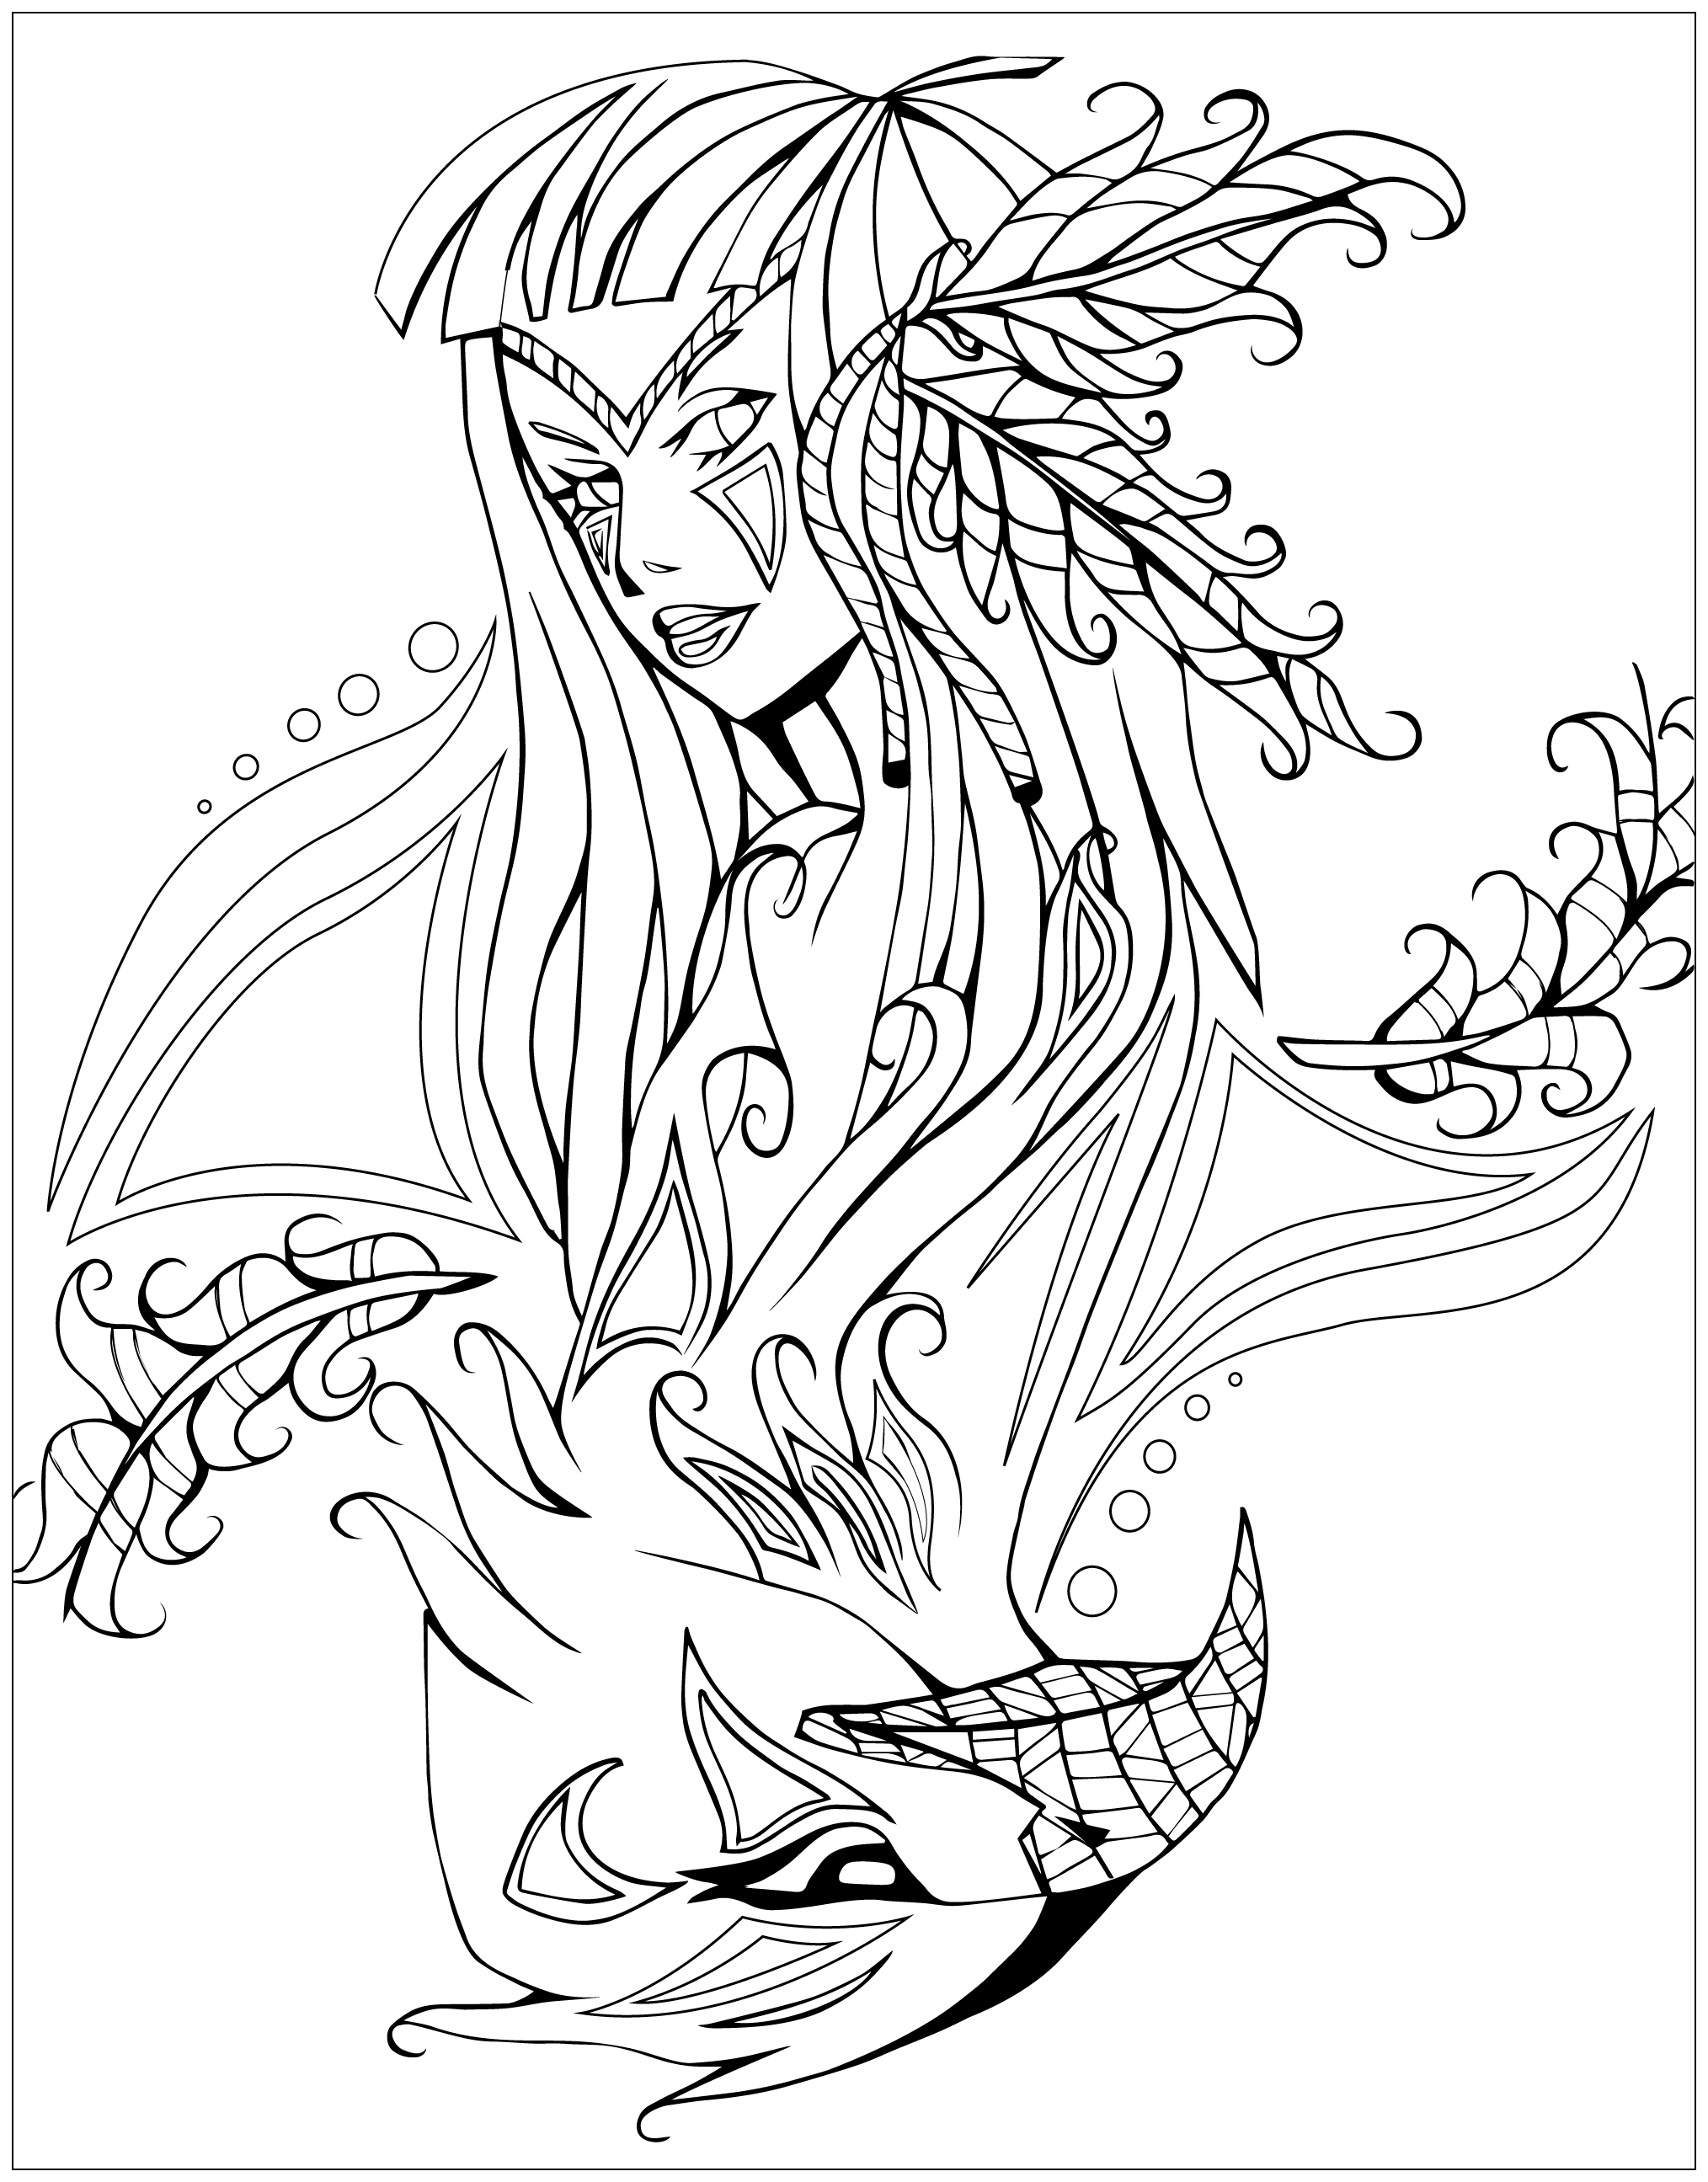 indians coloring pages indian coloring pages getcoloringpagescom indians coloring pages 